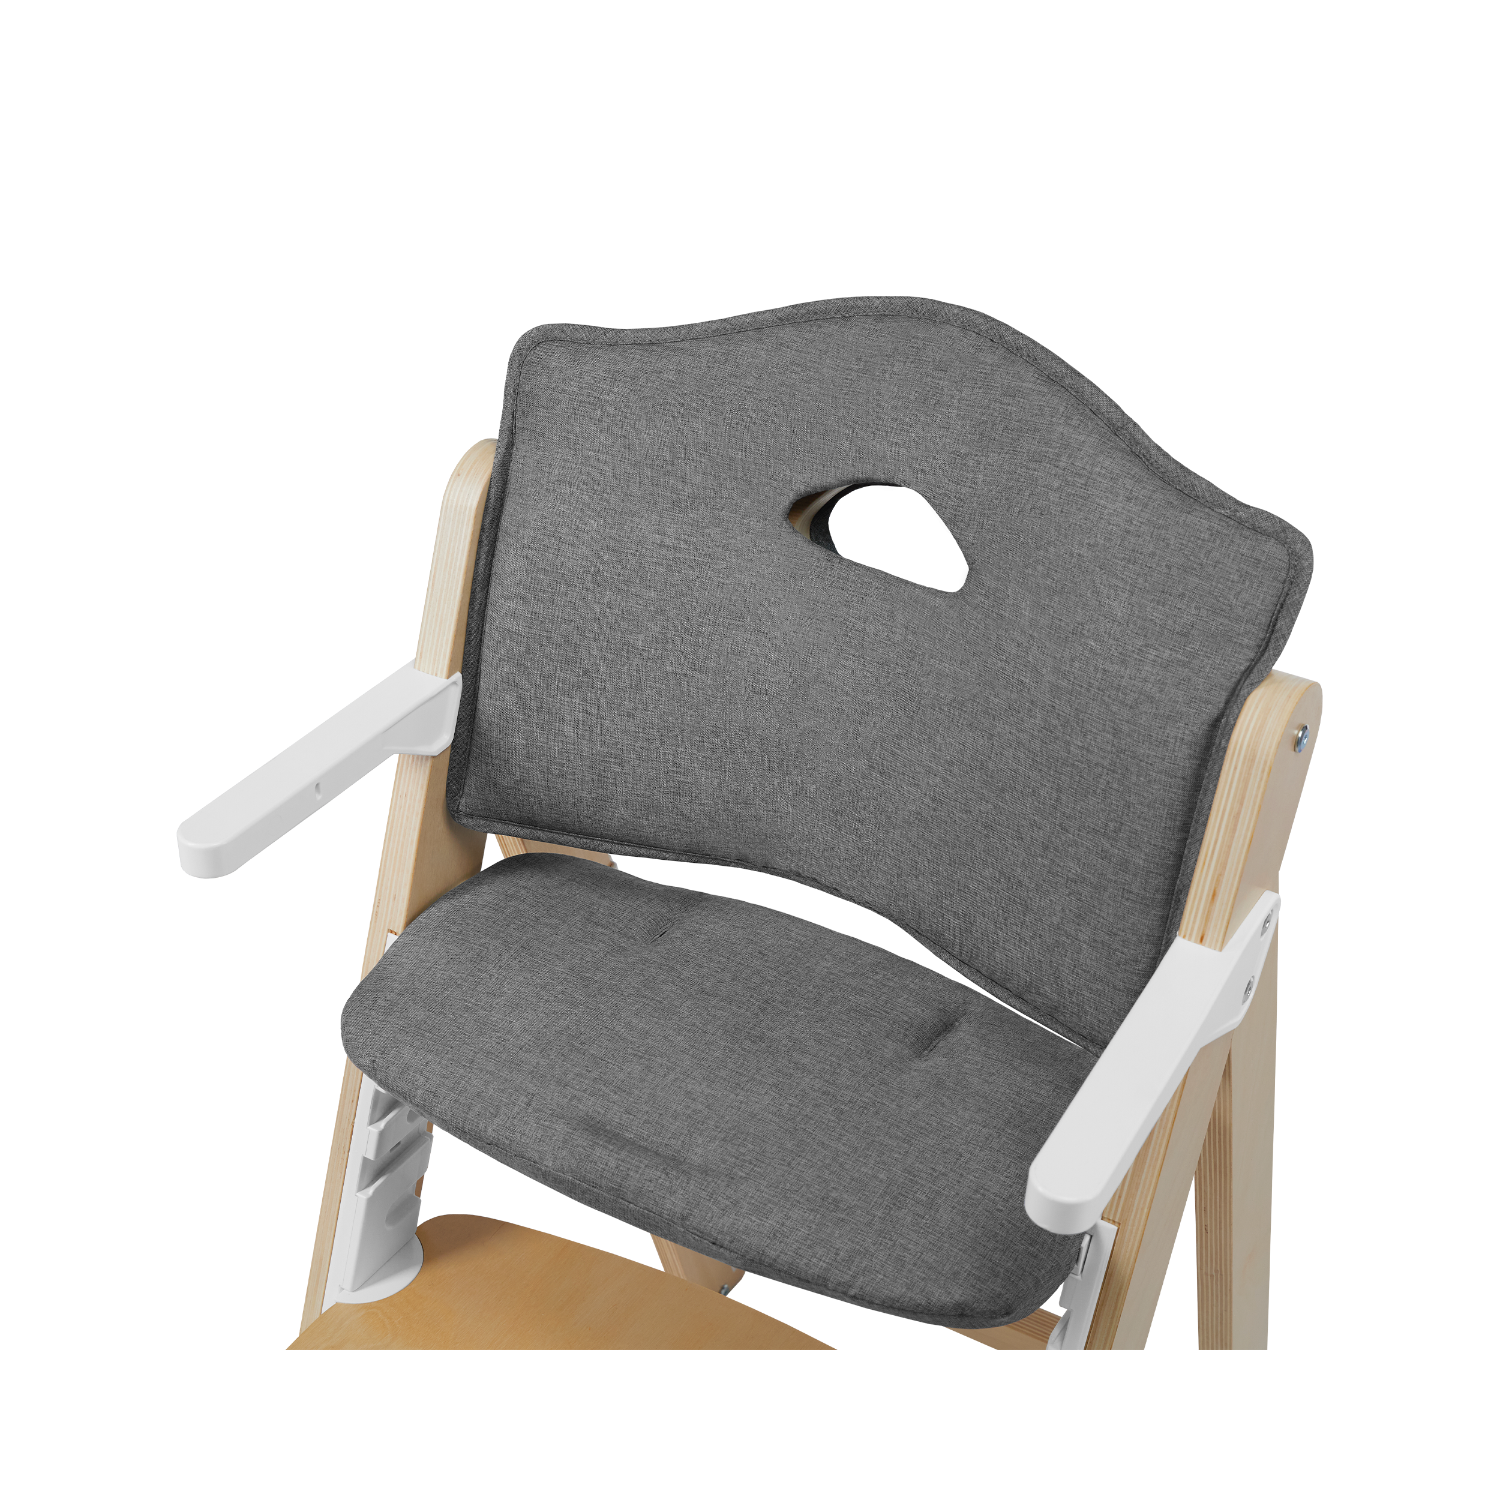 Lionelo Floris Cushion Grey Stone — Inlay for the high chair